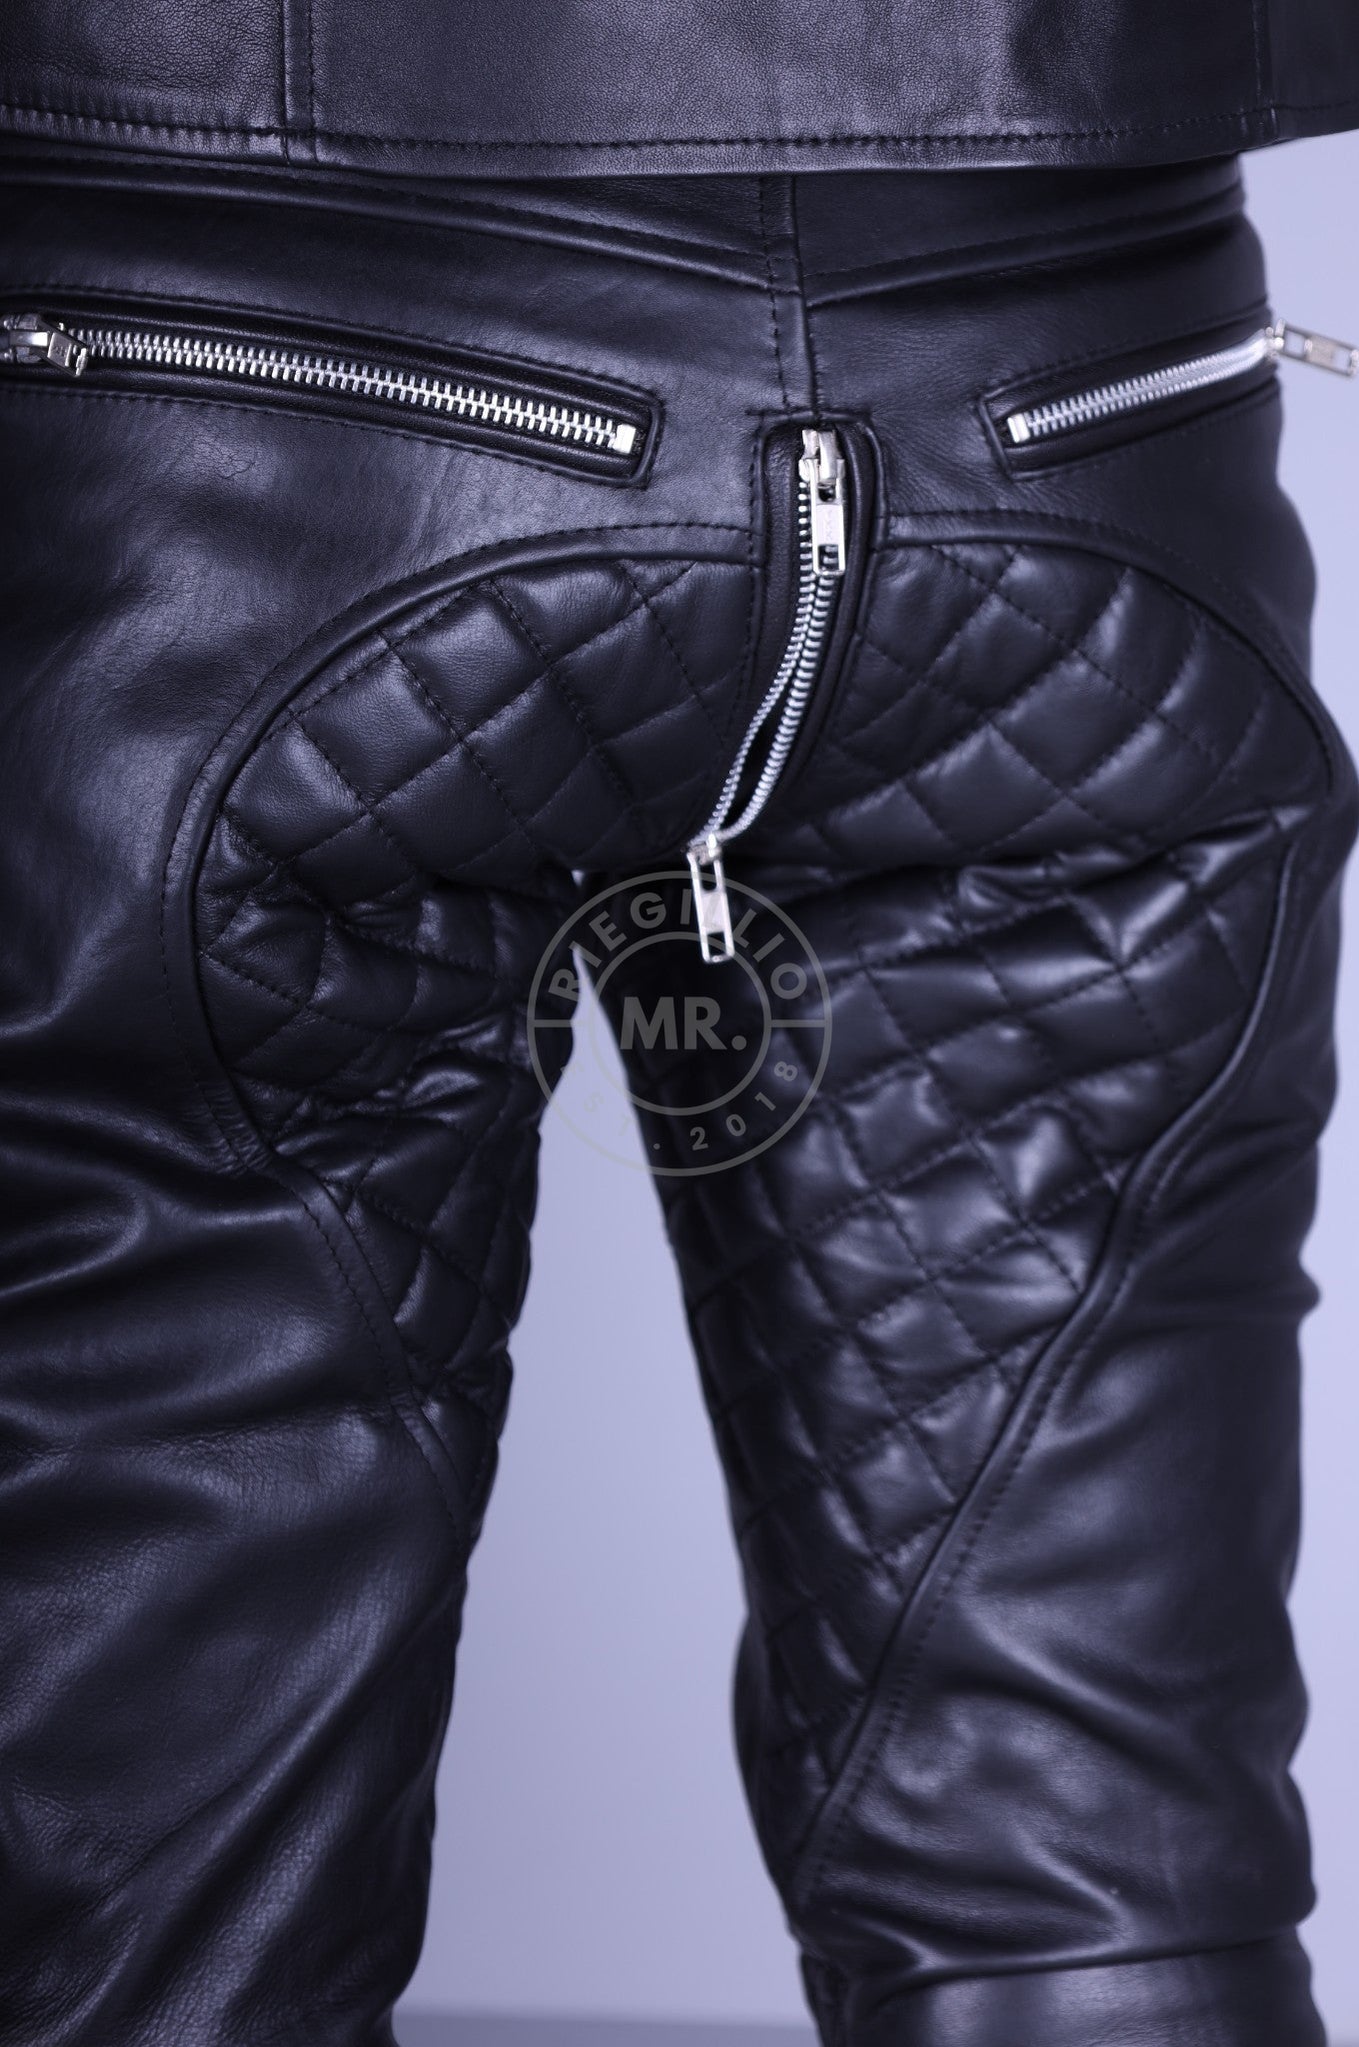 Padded Leather Pants - Black Piping-at MR. Riegillio